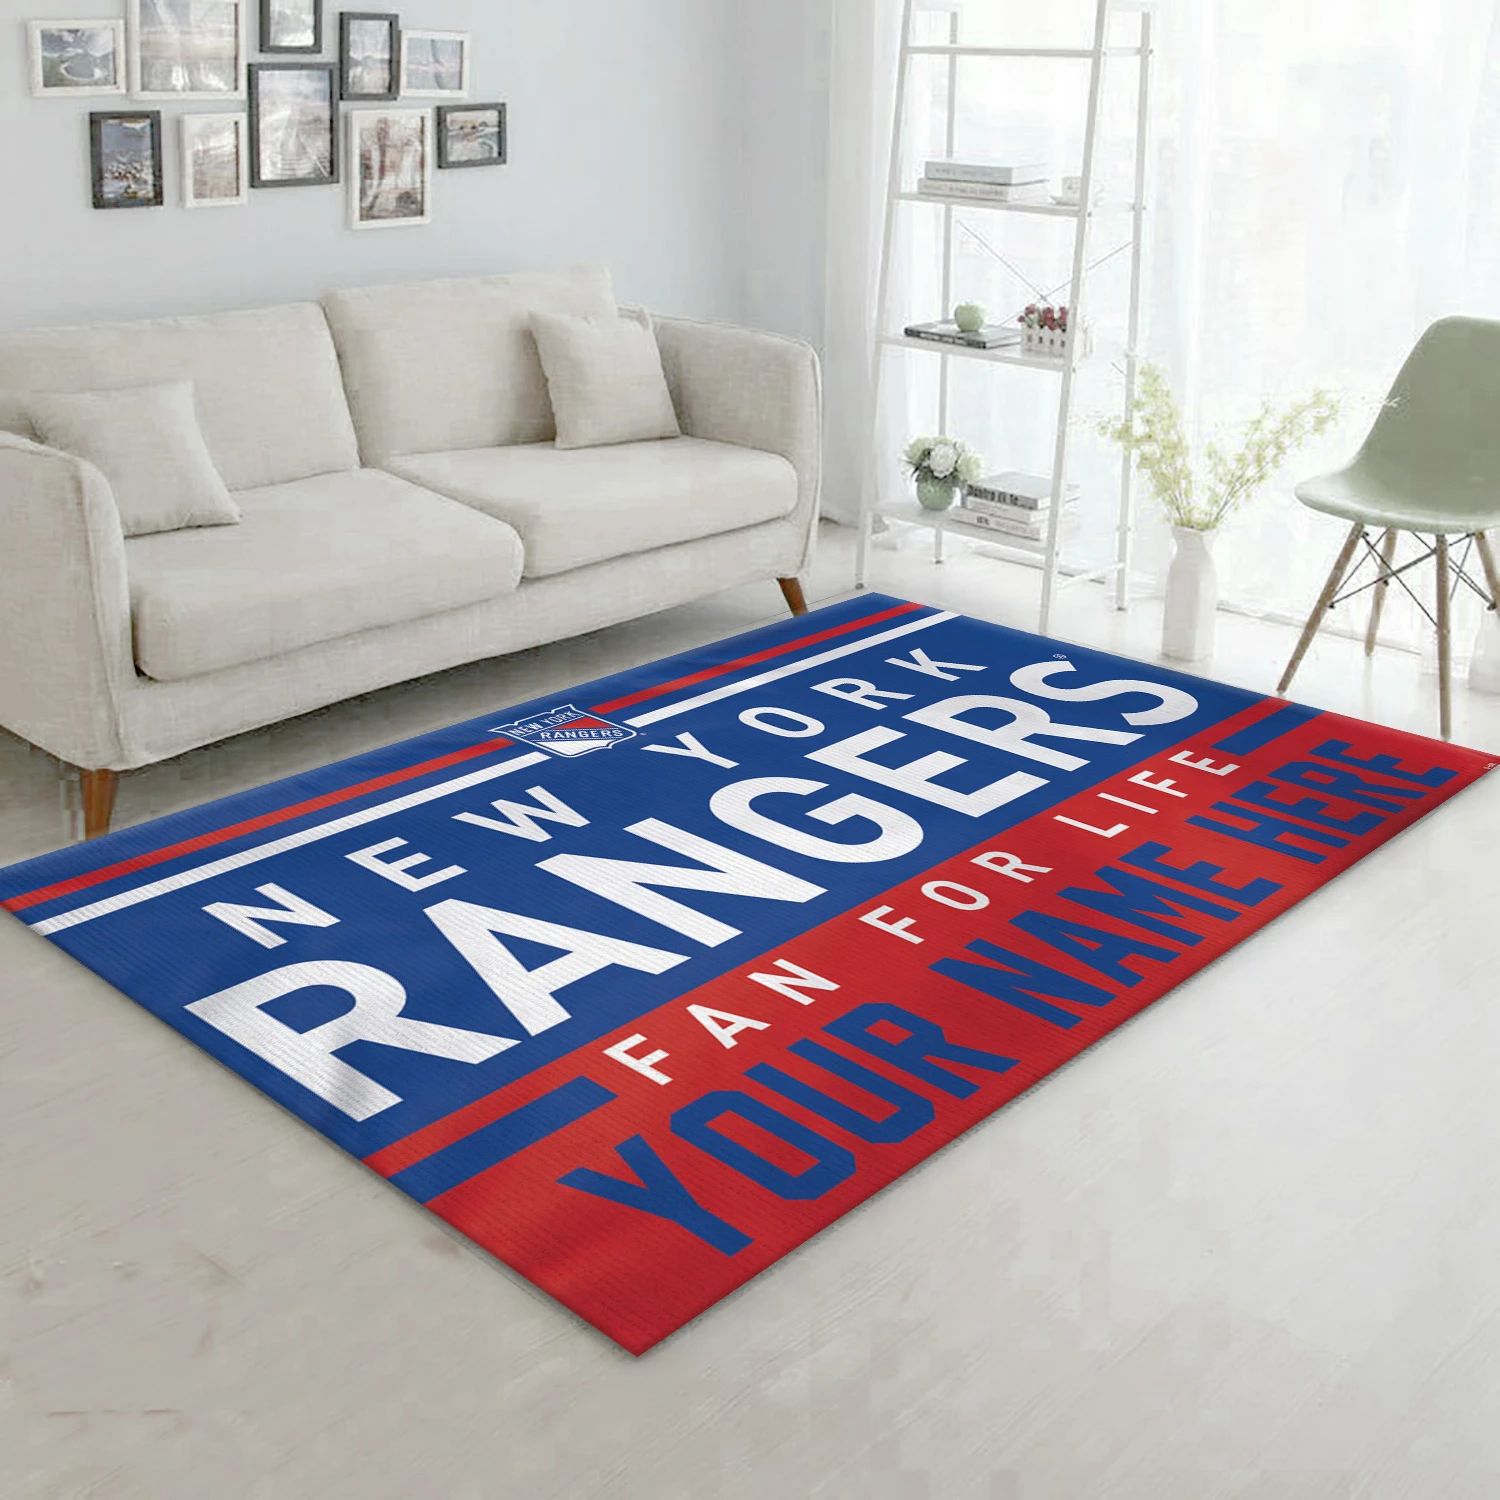 New York Rangers Personal NHL Area Rug Carpet, Sport Living Room Rug - Home Decor - Indoor Outdoor Rugs 1